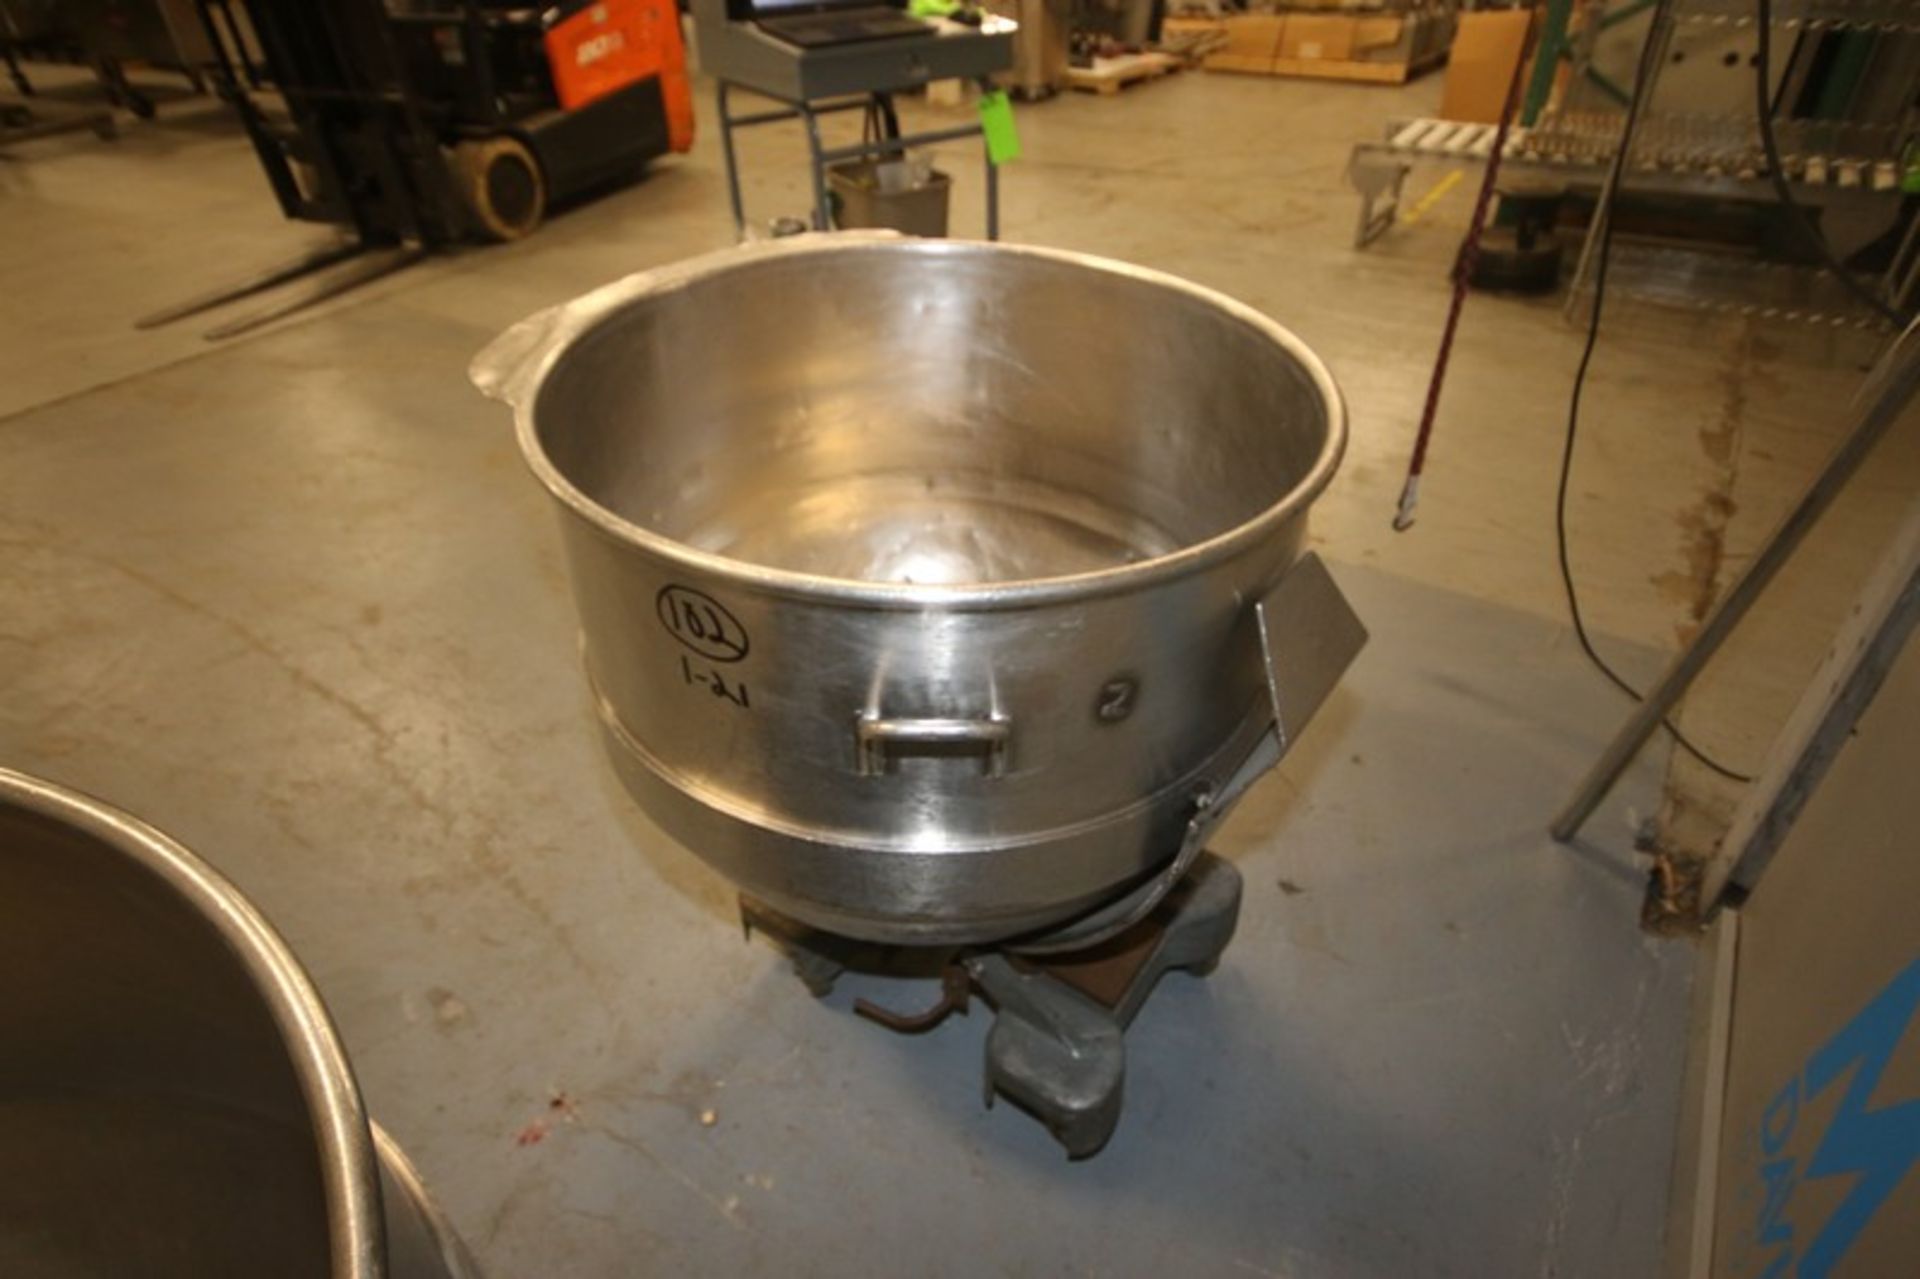 S/S Mixing Bowl, Internal Dims.:  Aprox. 32-1/2" Dia. x 26-1/2" Deep, Mounted on Portable Cart ( - Image 8 of 8